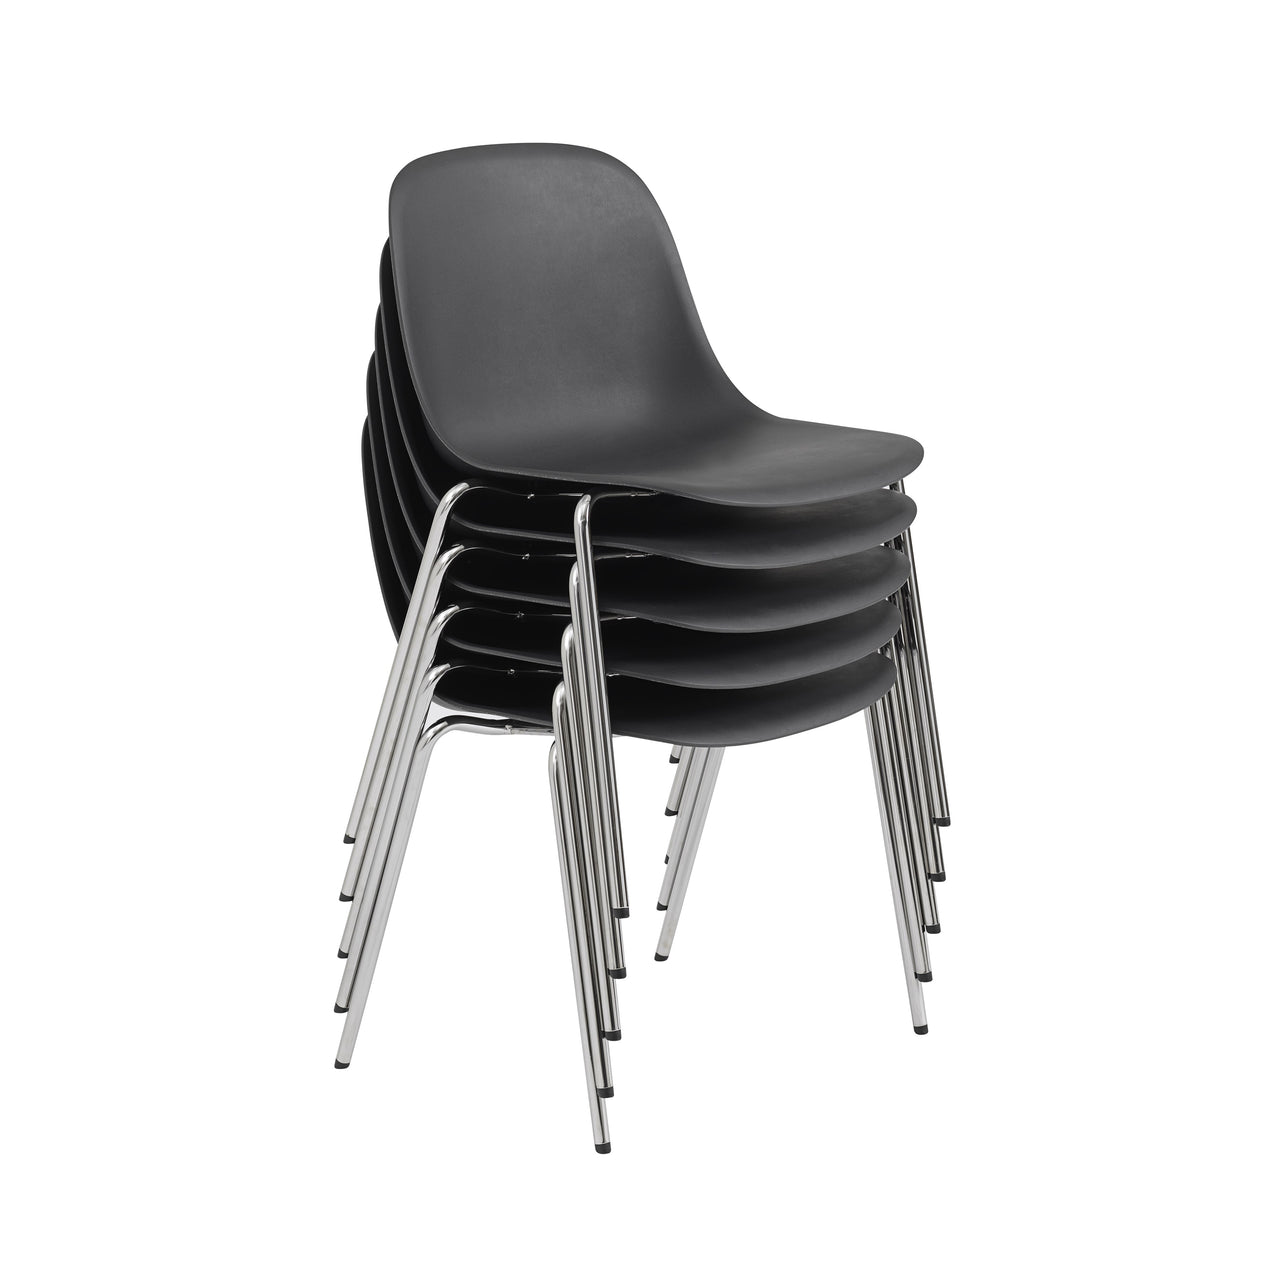 Fiber Side Chair: A-Base with Glides + Black